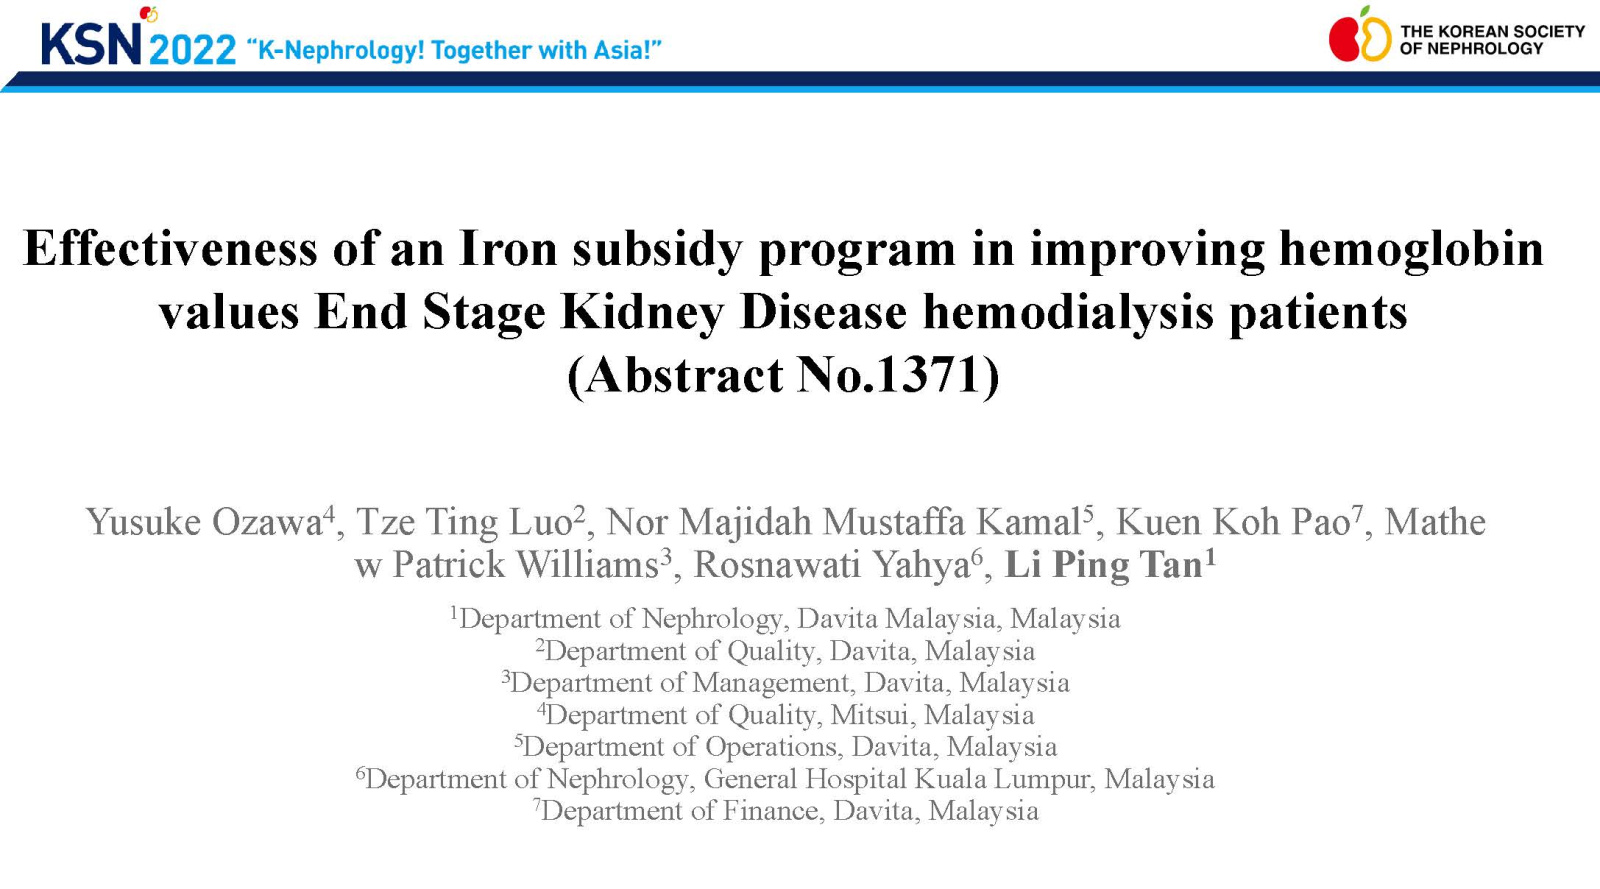 The 42nd Annual Meeting of the Korean Society of Nephrology